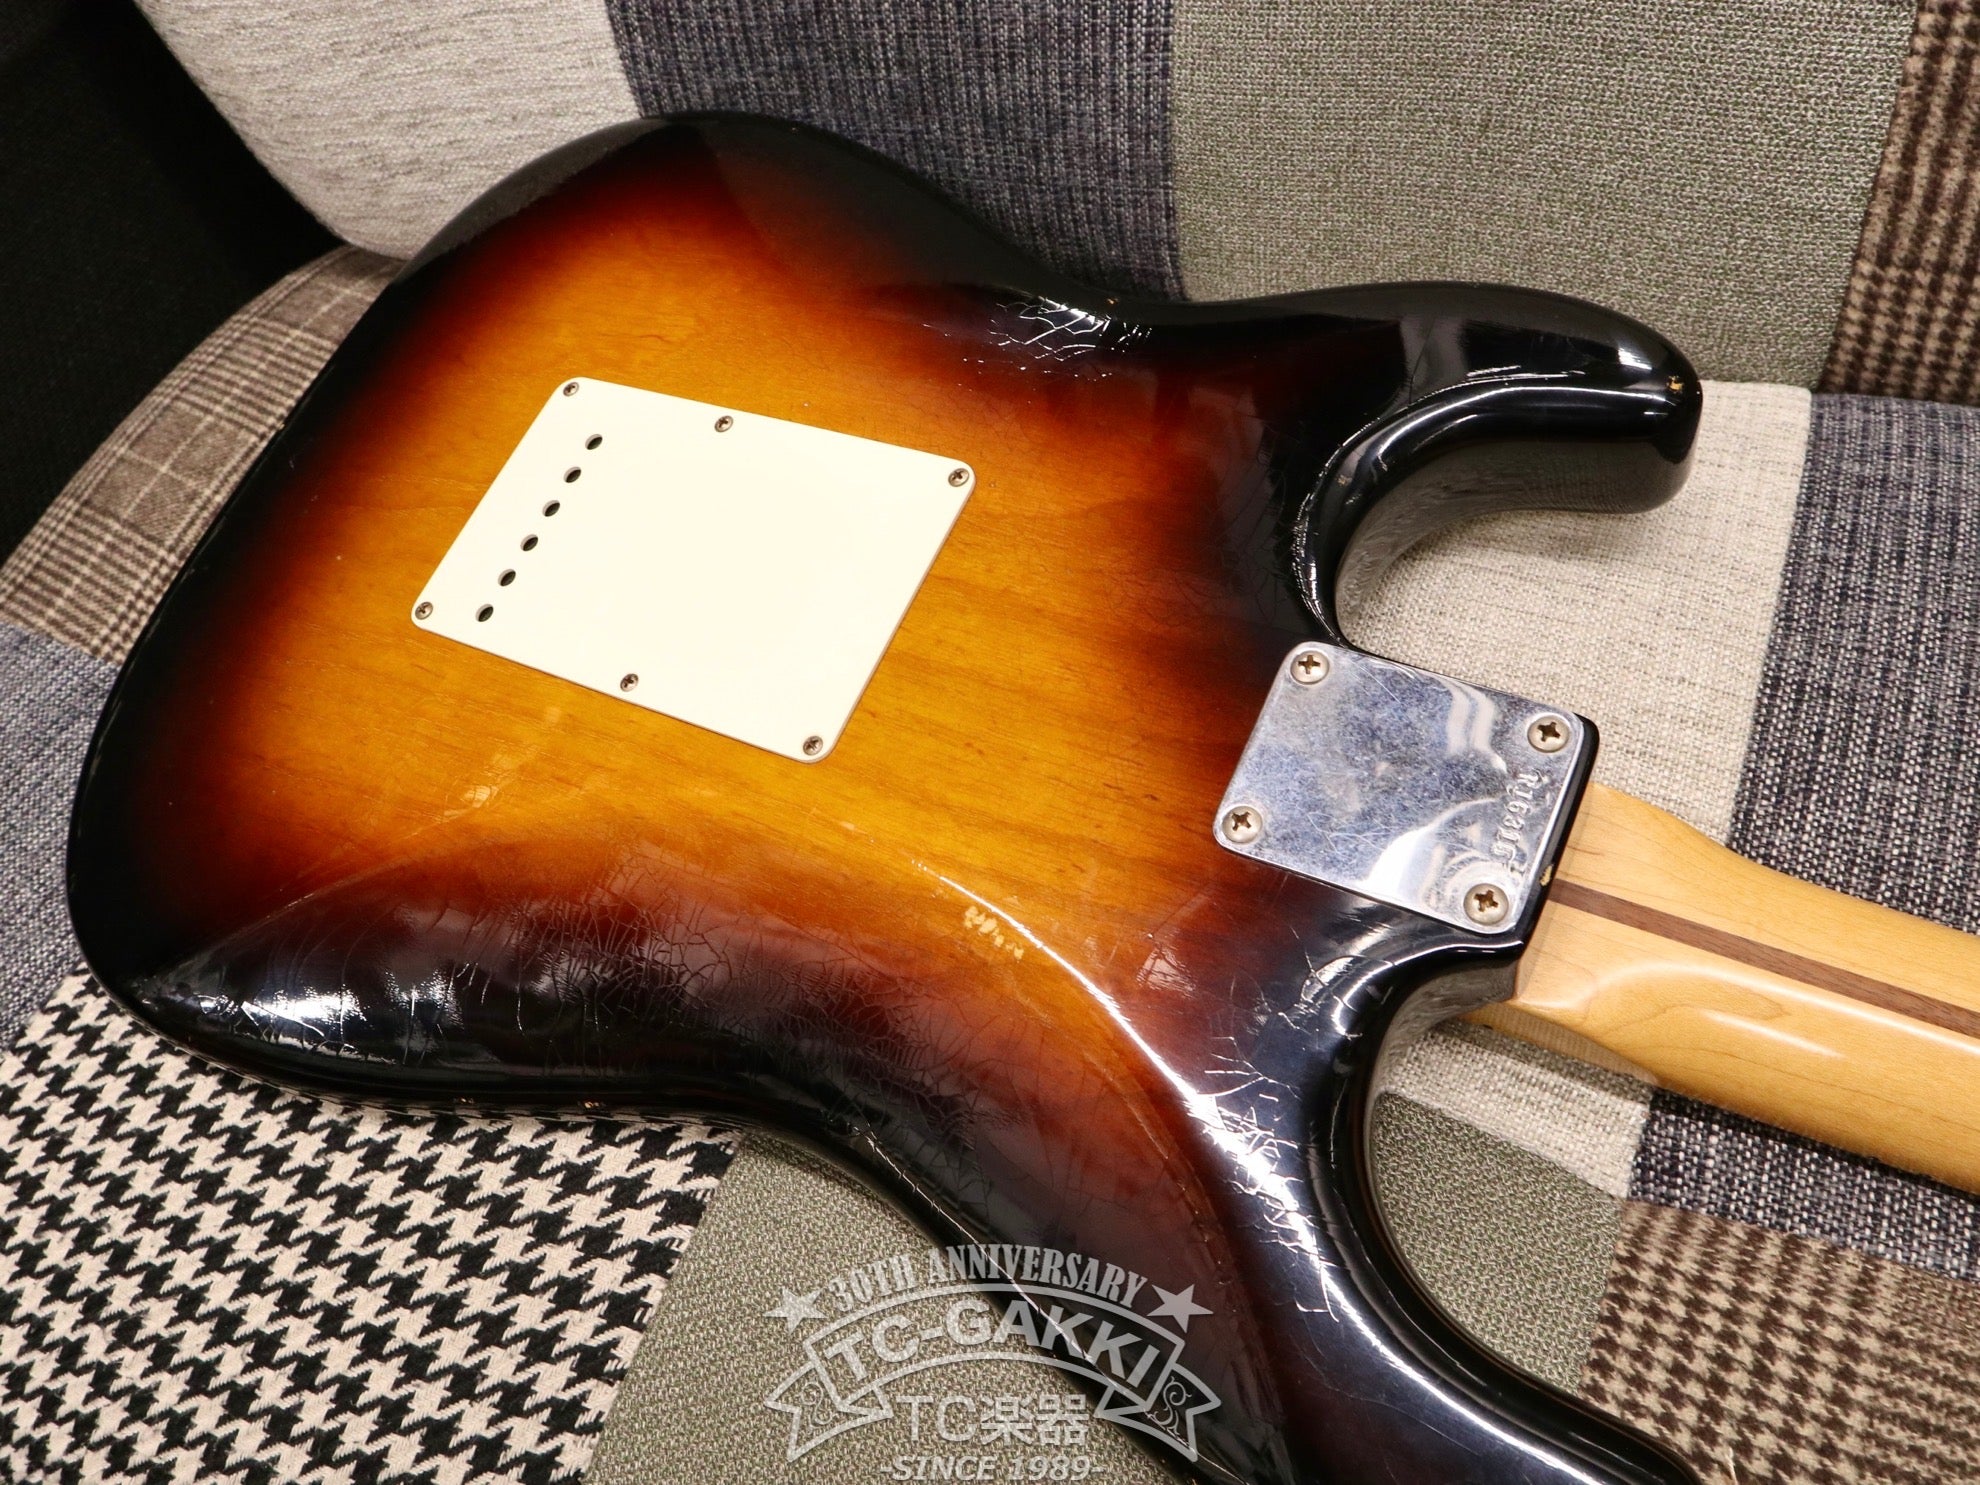 1954 Stratocaster Relic Master Built Series by John English